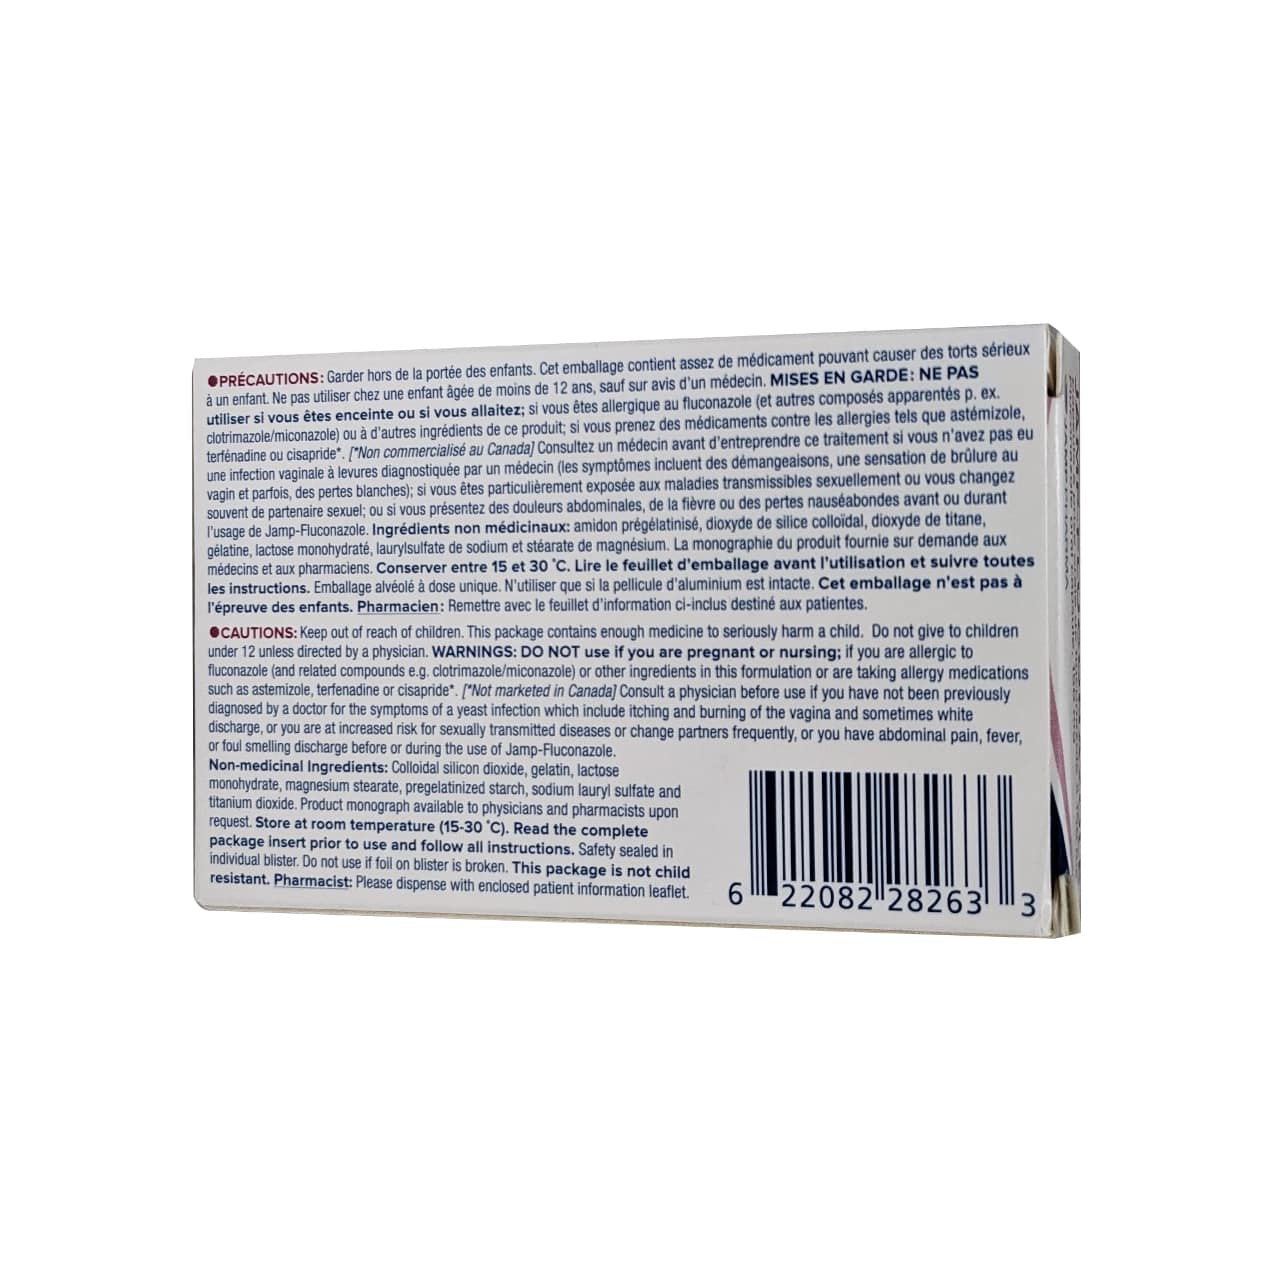 Ingredients and warnings for JAMP Fluconazole Antifungal Agent 150mg in English and French